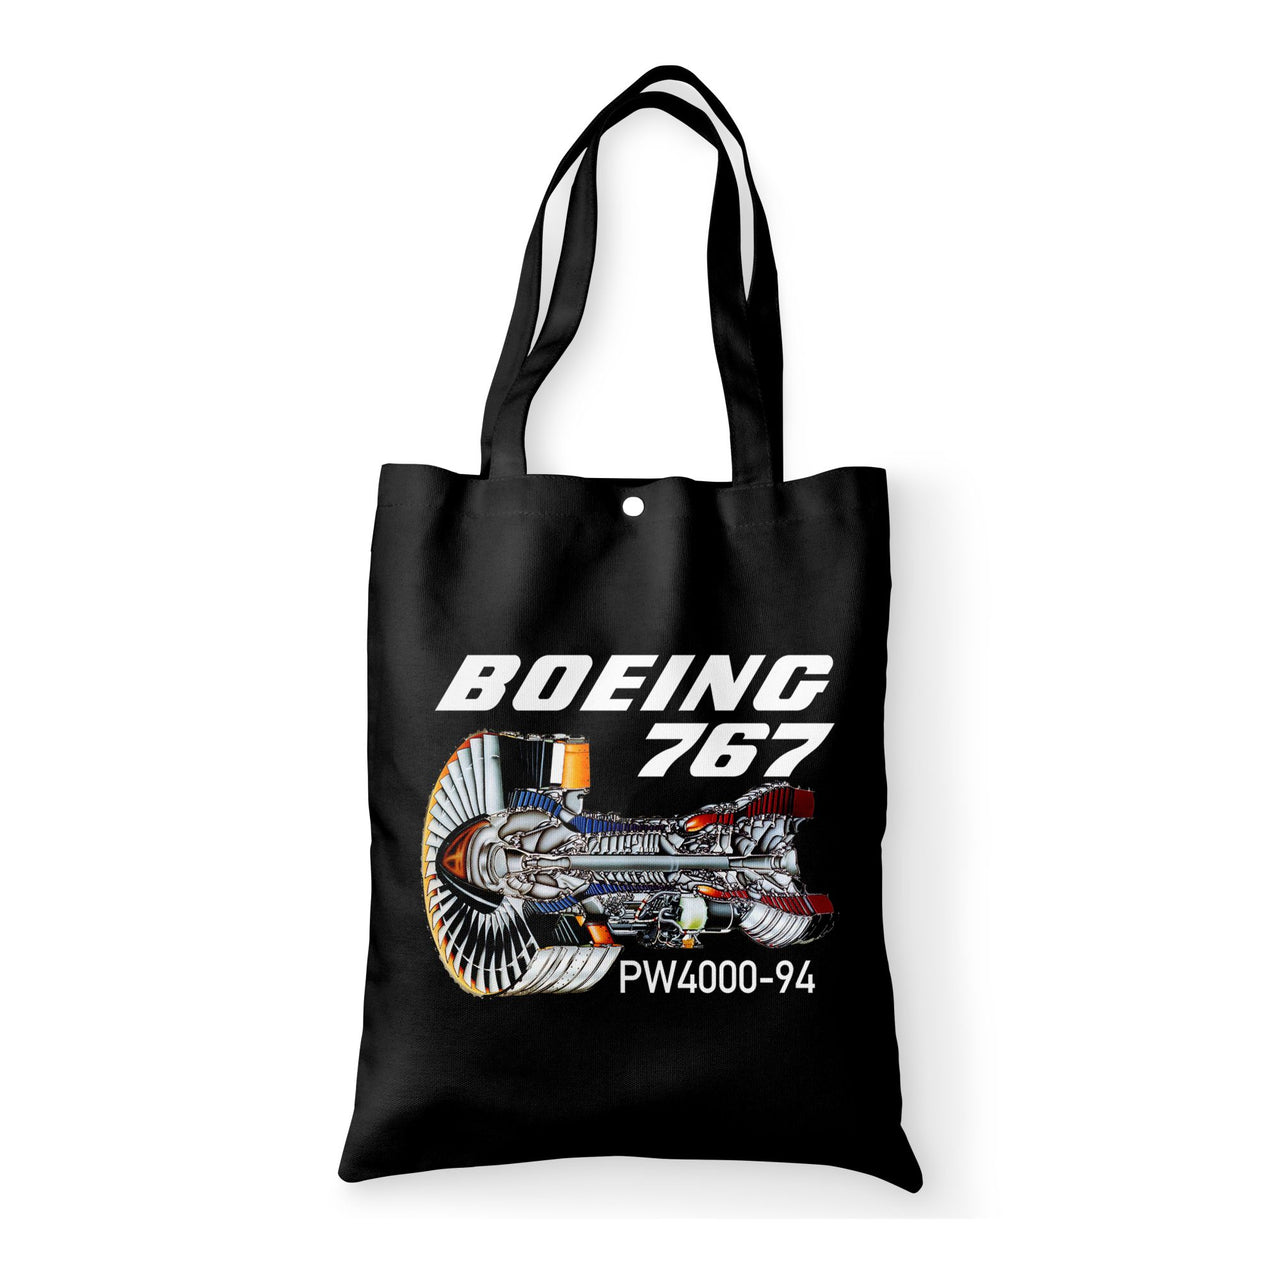 Boeing 767 Engine (PW4000-94) Designed Tote Bags